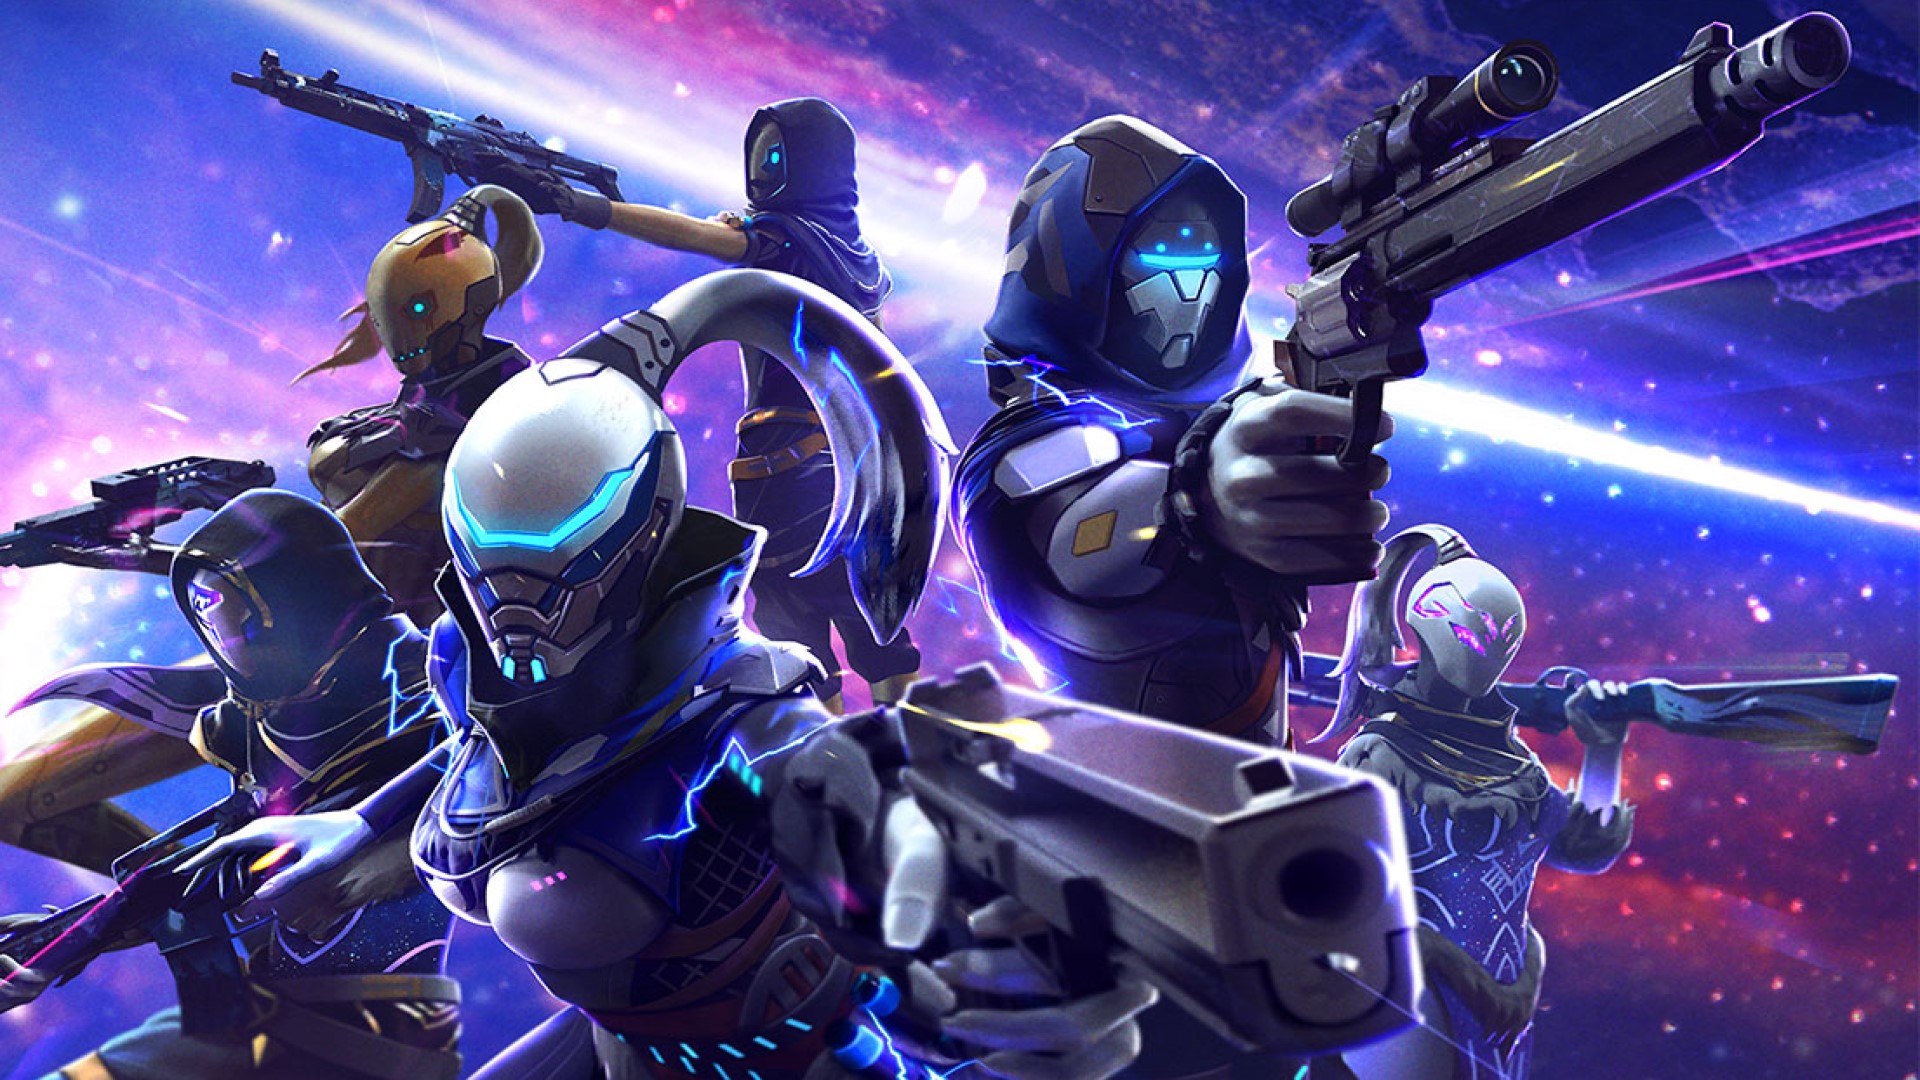 Best mobile multiplayer games: Garena Free Fire. Image shows a bunch of armed, robotic figures.